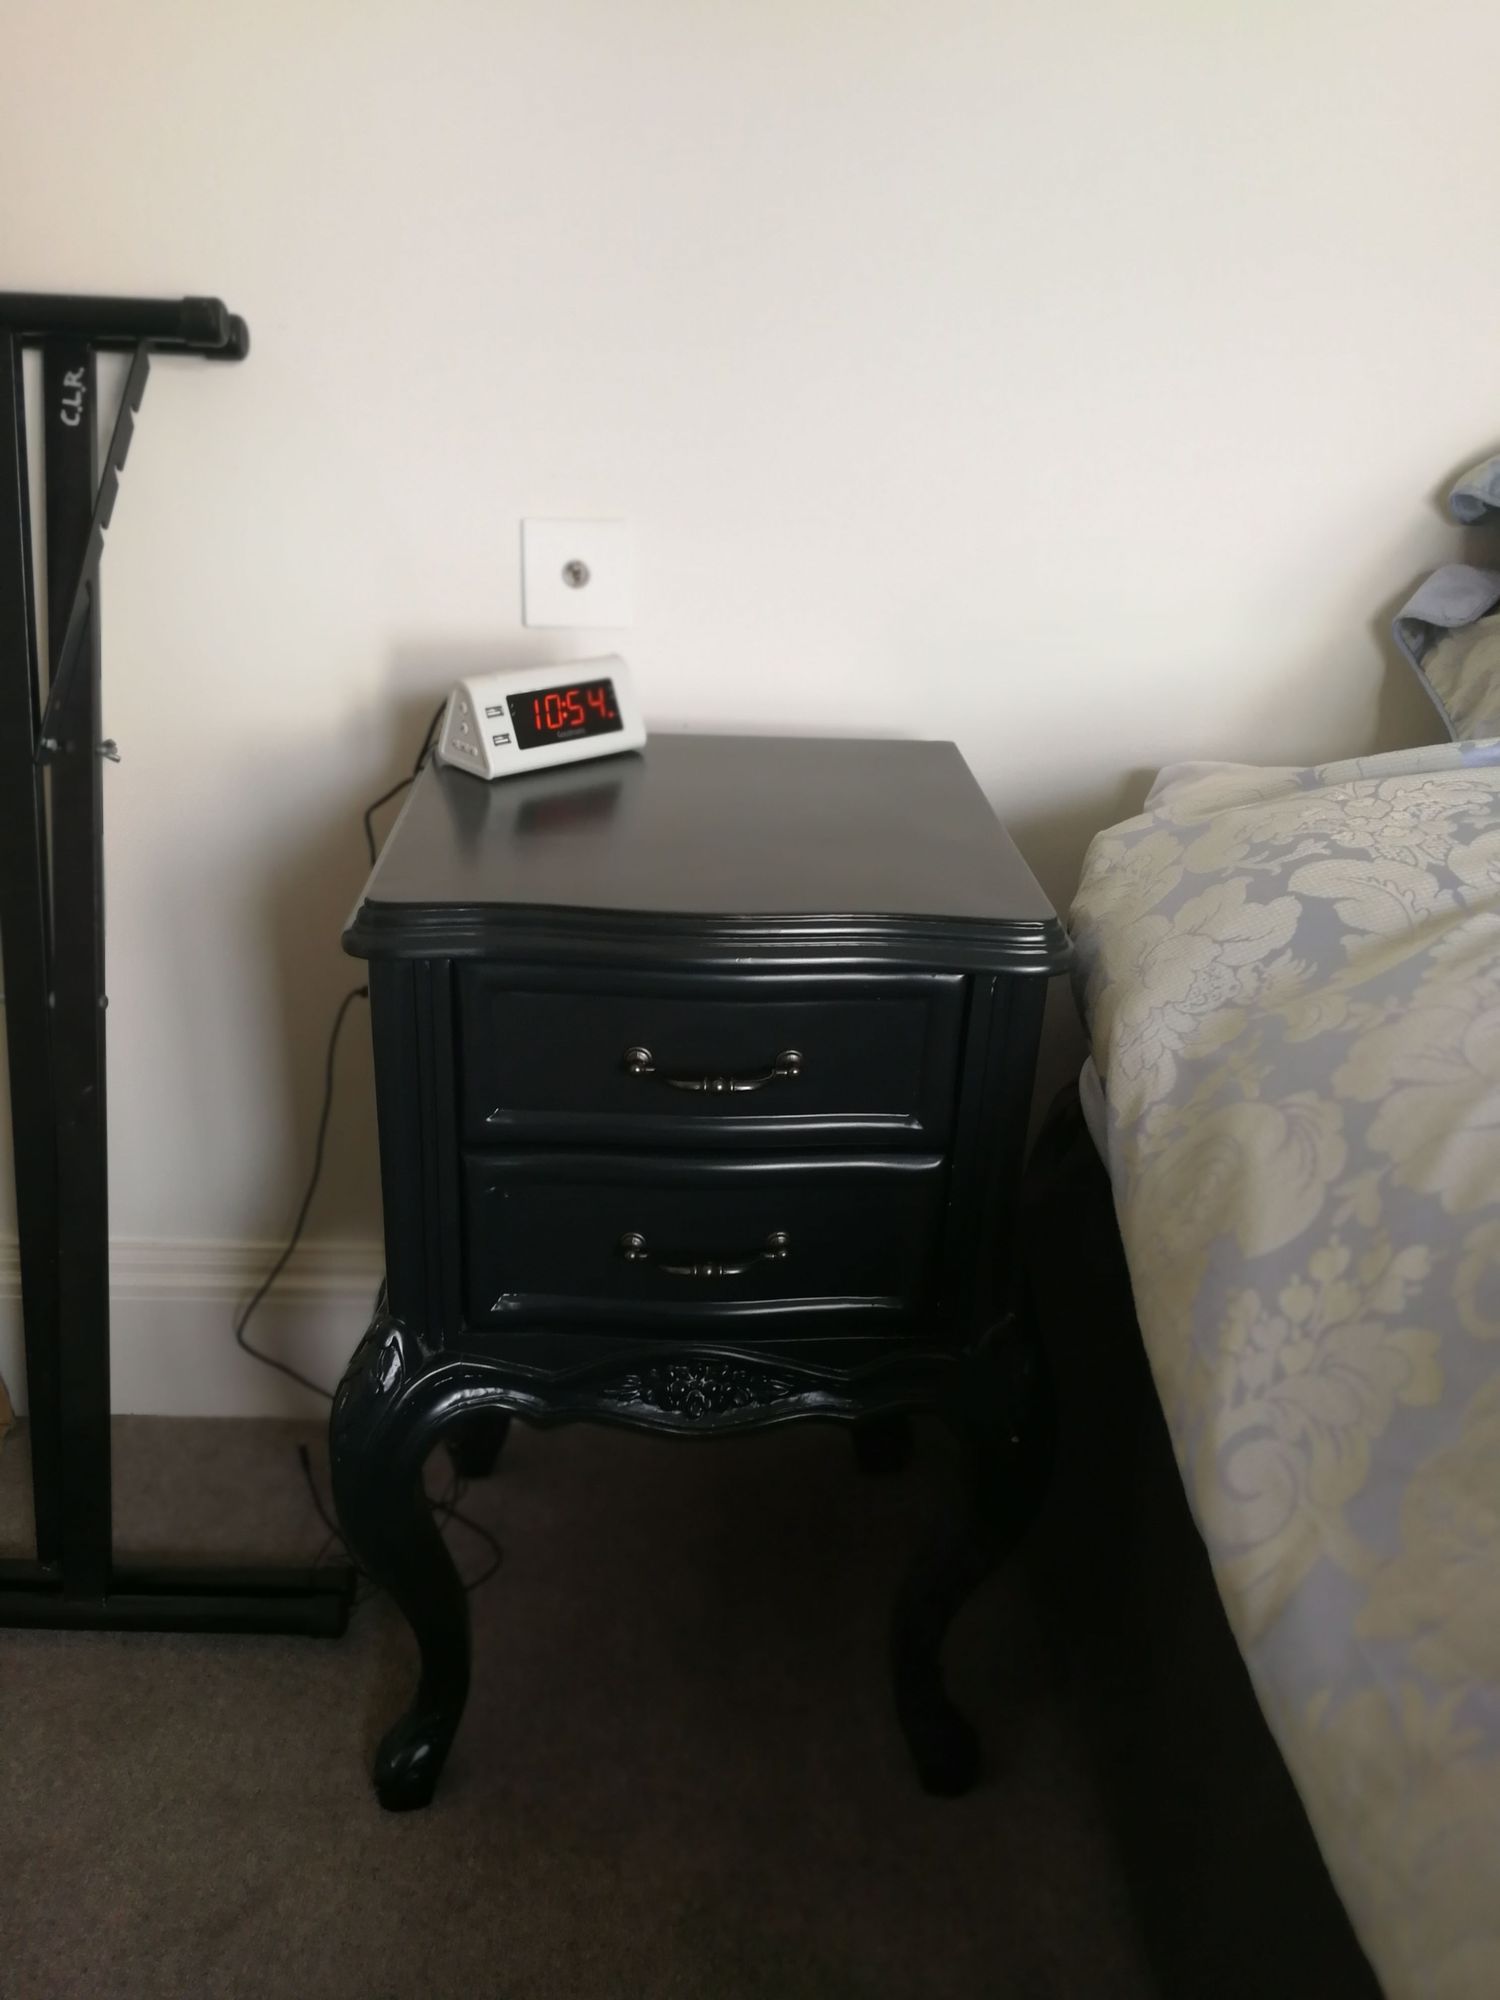 The old bedside table was heavy and black, and had no lamp.